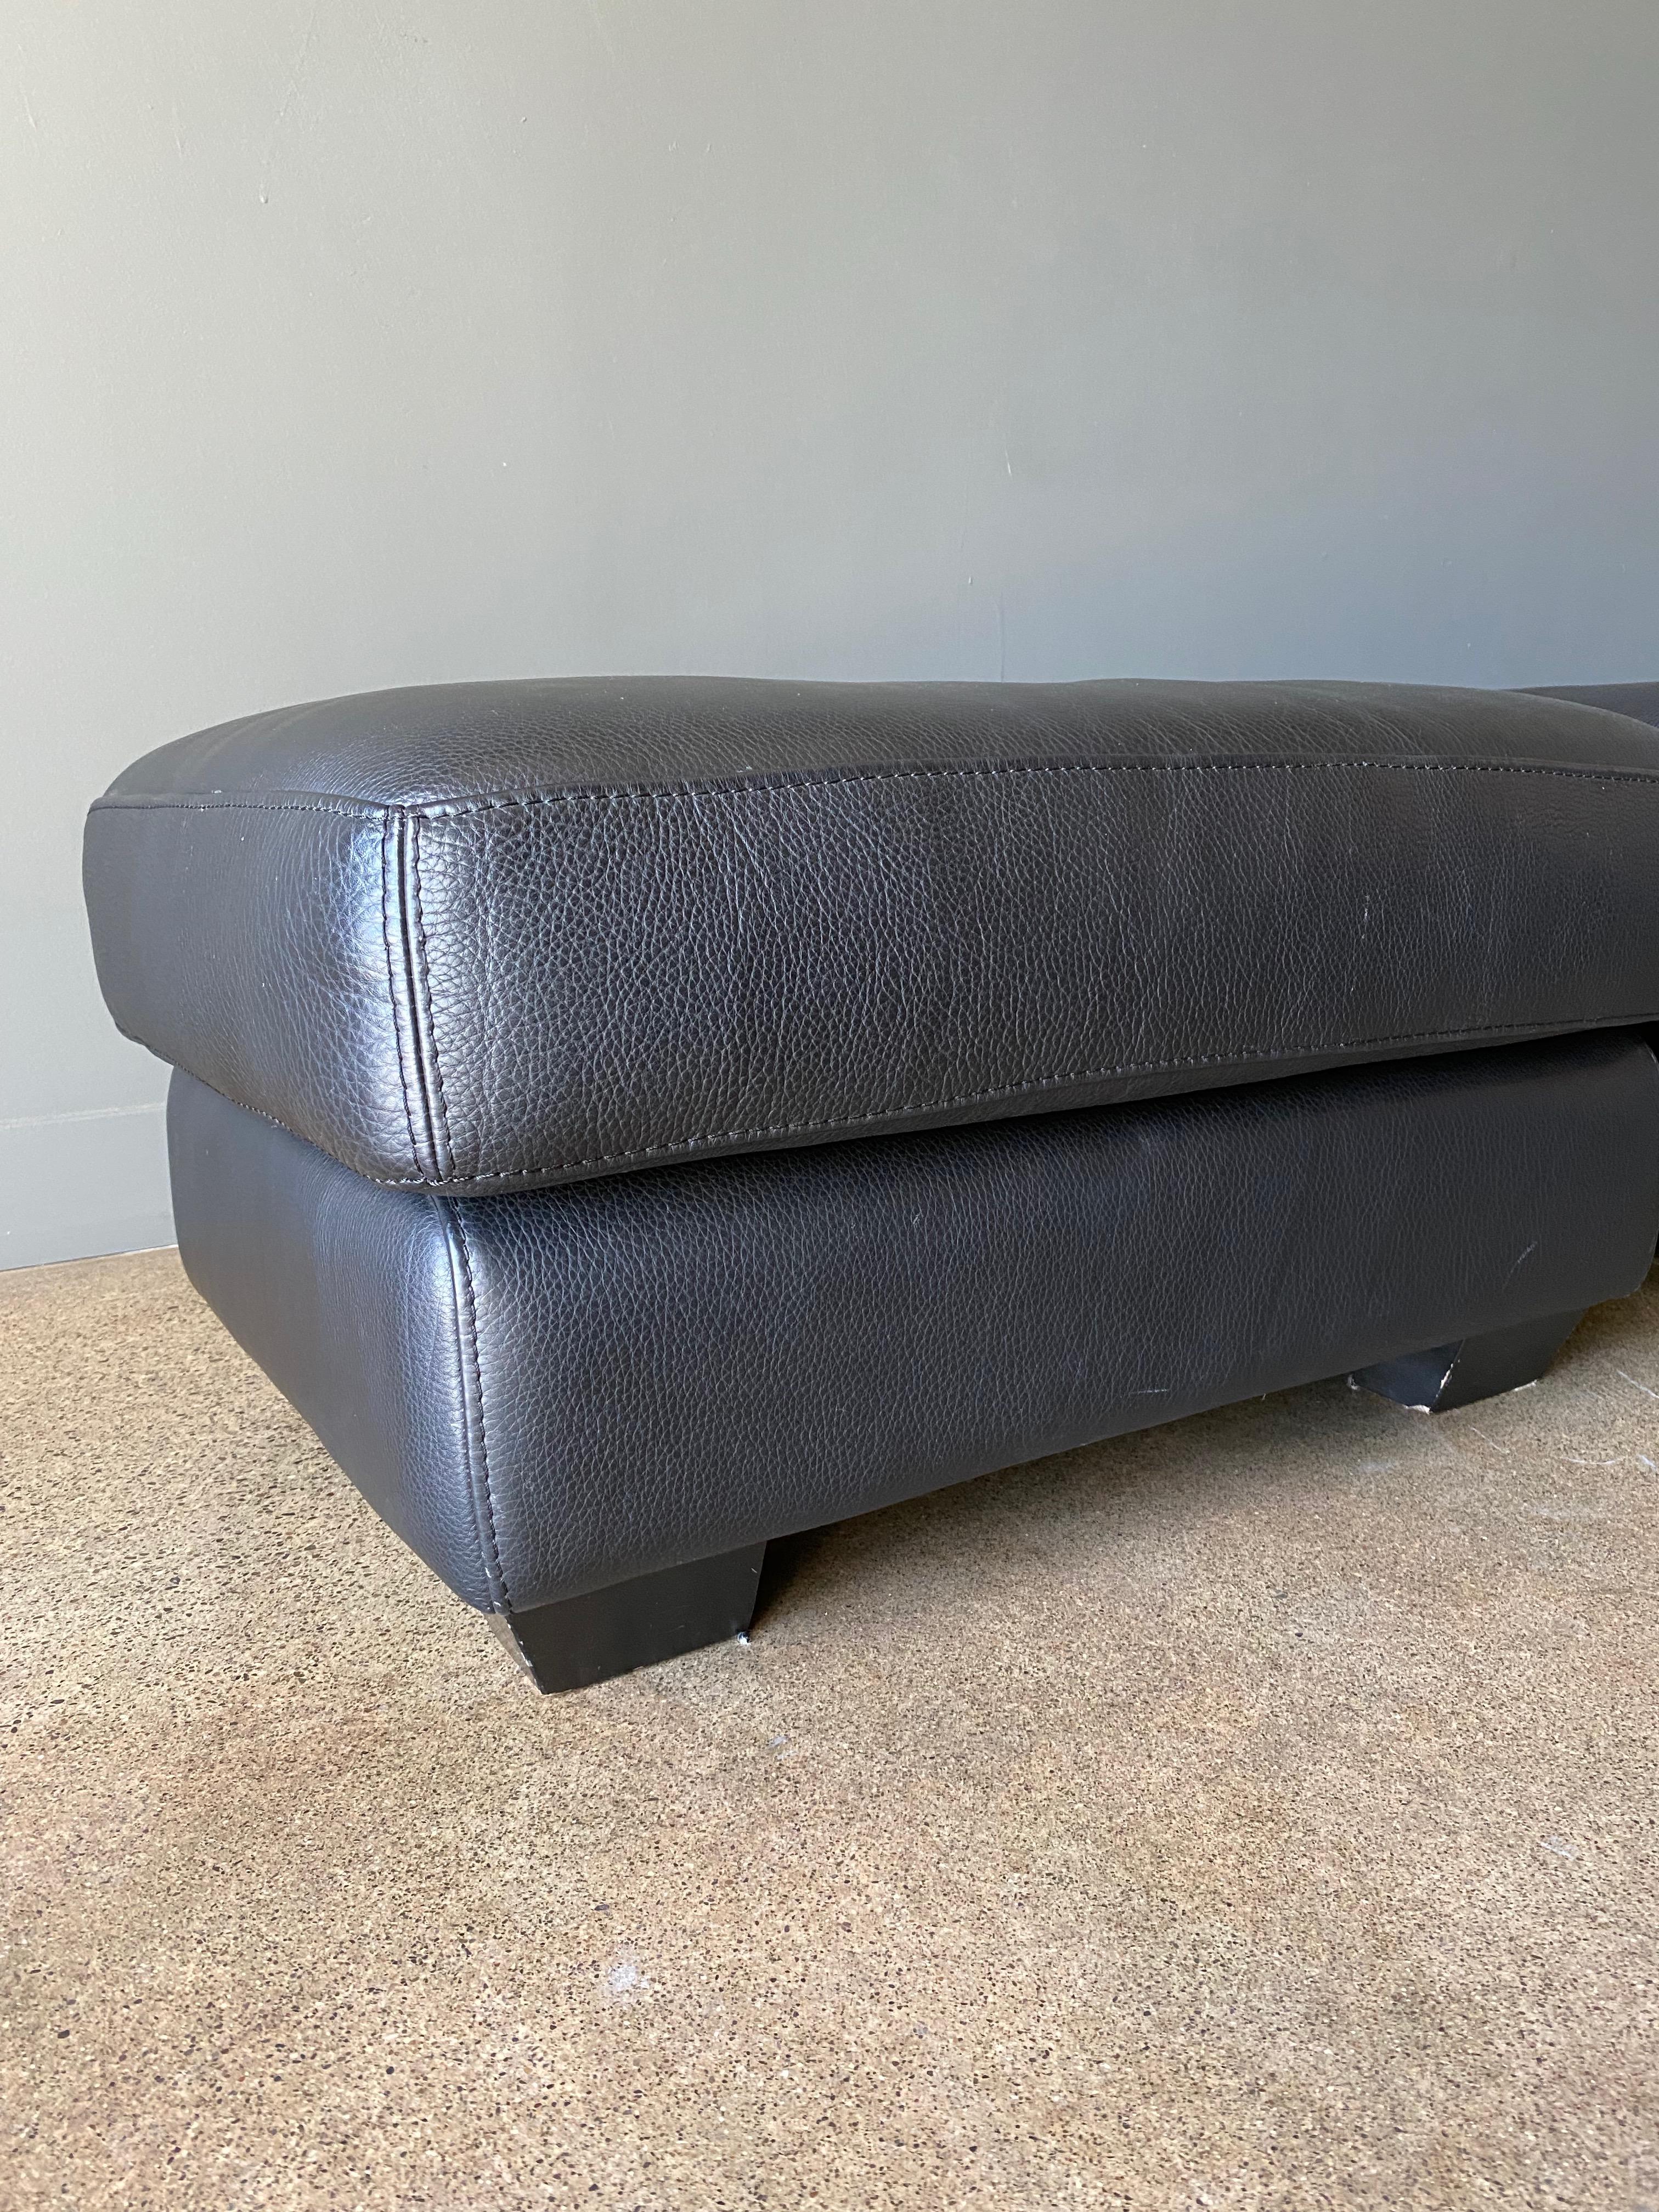 Hand-Crafted Post Modern Leather Ottomans by Roche Bobois, Circa 1980s